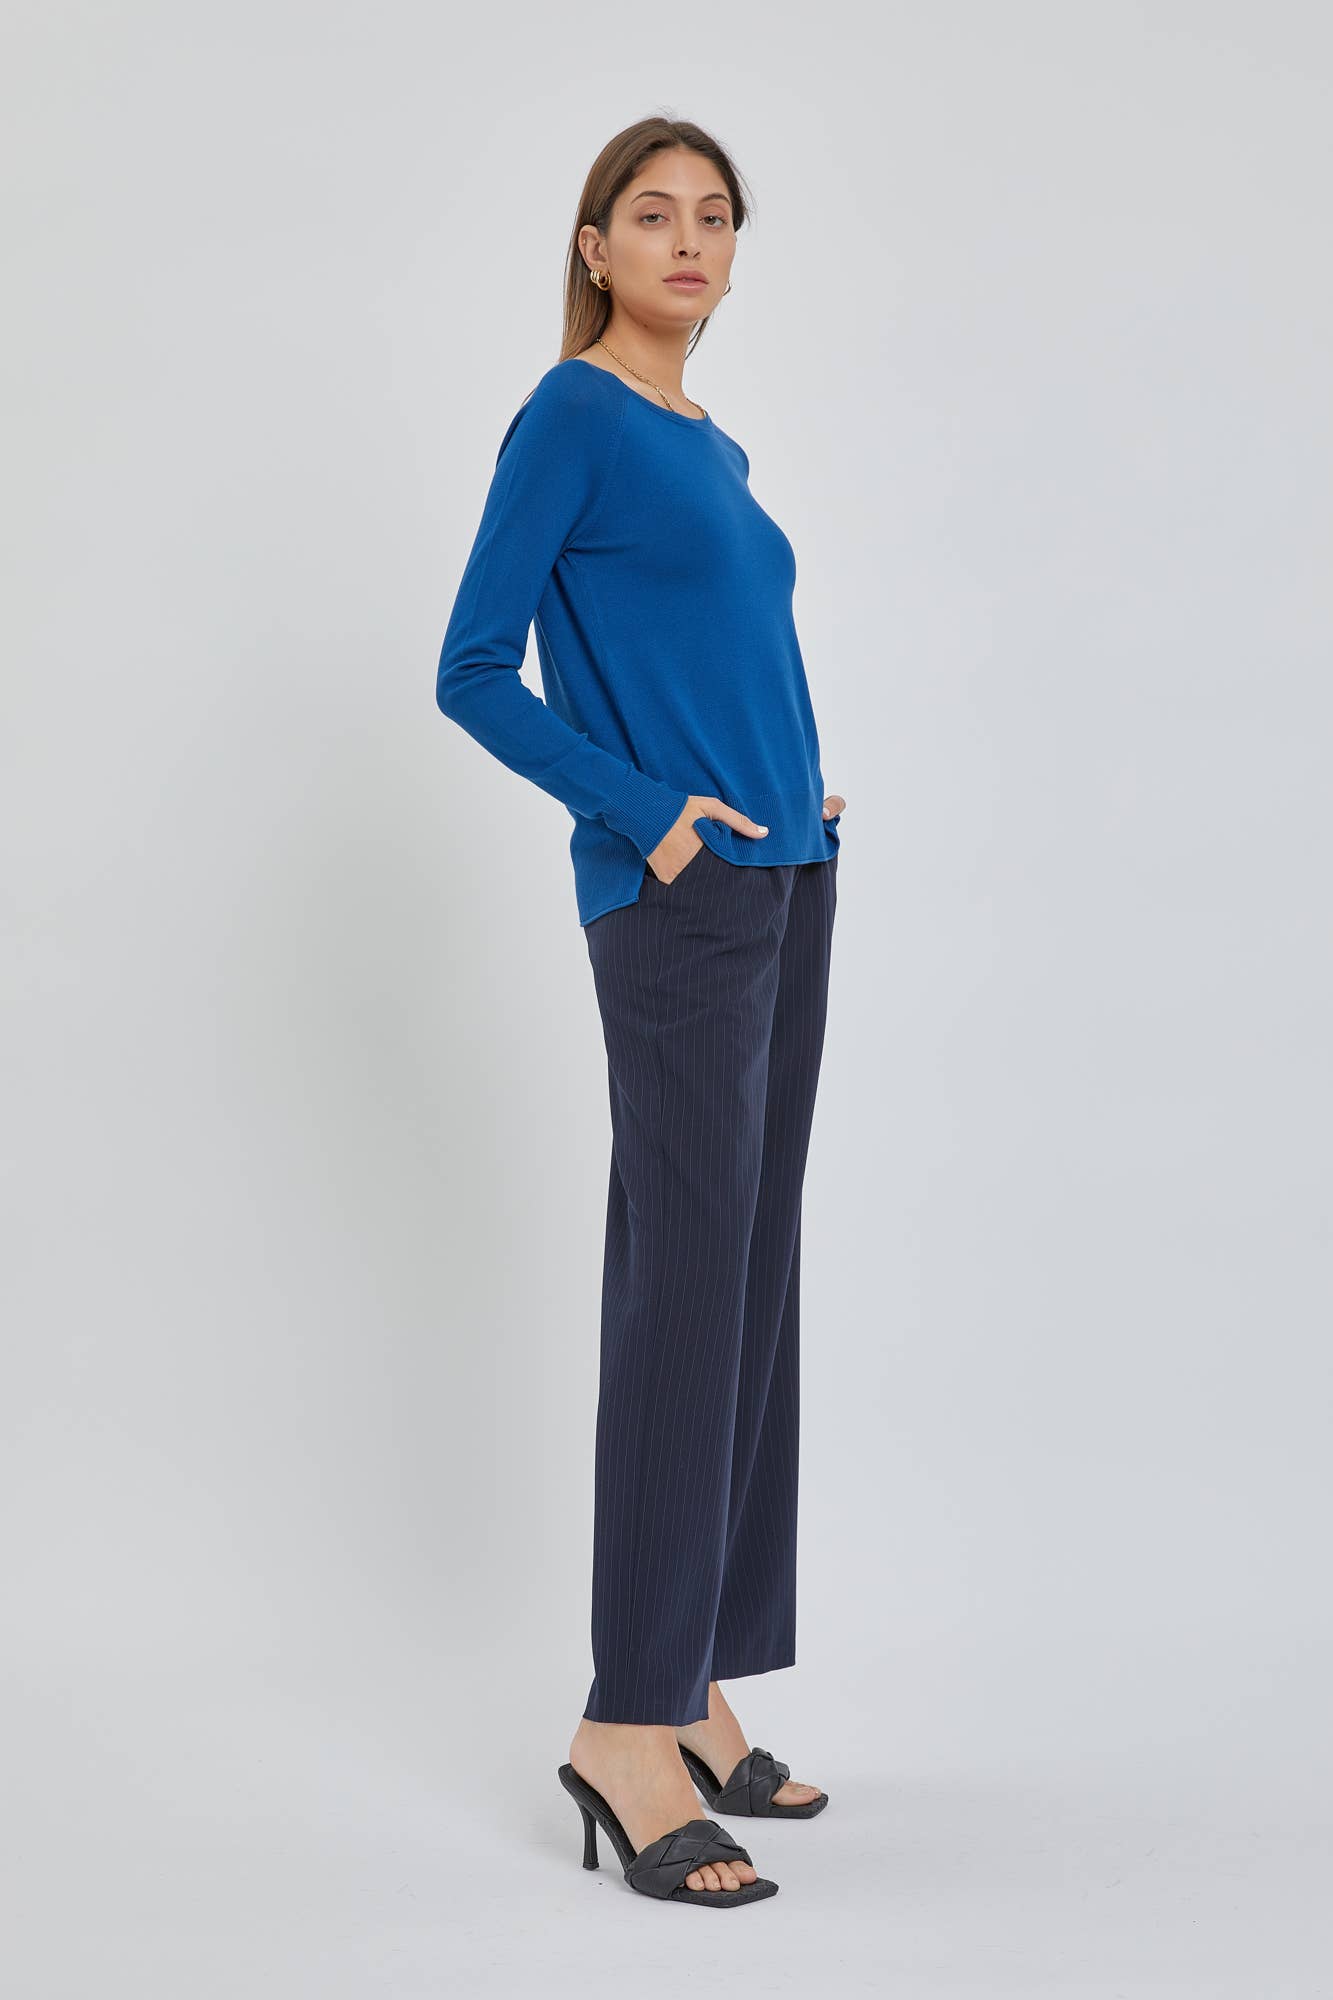 The Camille Sweater: Small / Cobalt